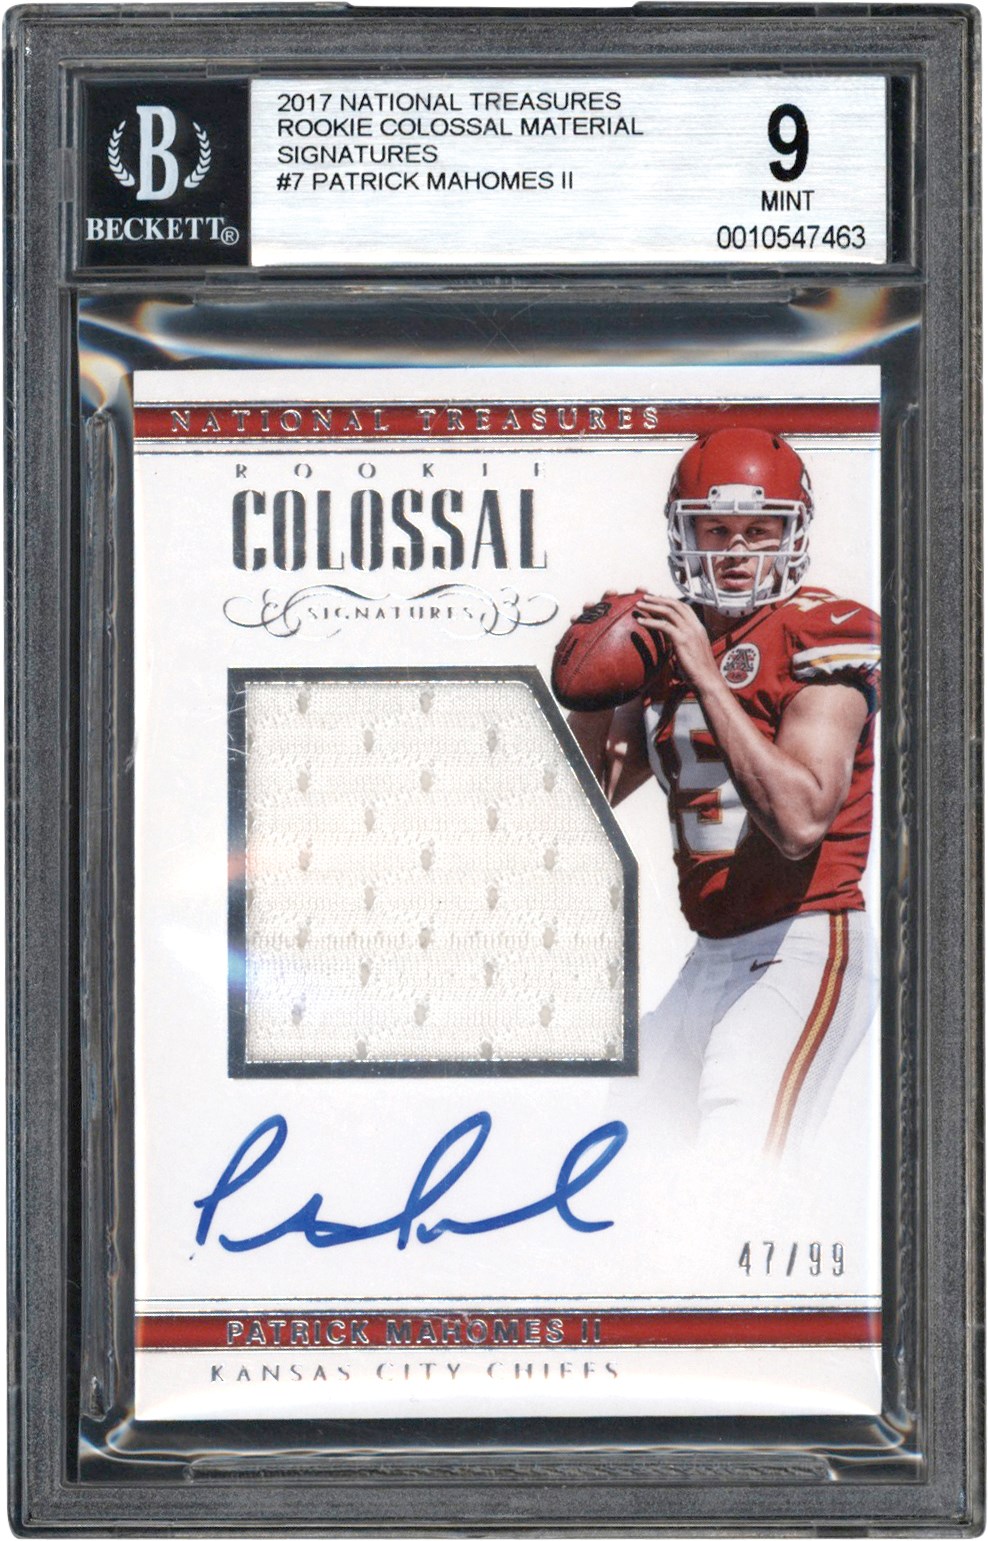 - 2017 National Treasures Football Rookie Colossal Material Signatures #7 Patrick Mahomes Autograph Jersey Card #47/99 BGS MINT 9 Auto 10